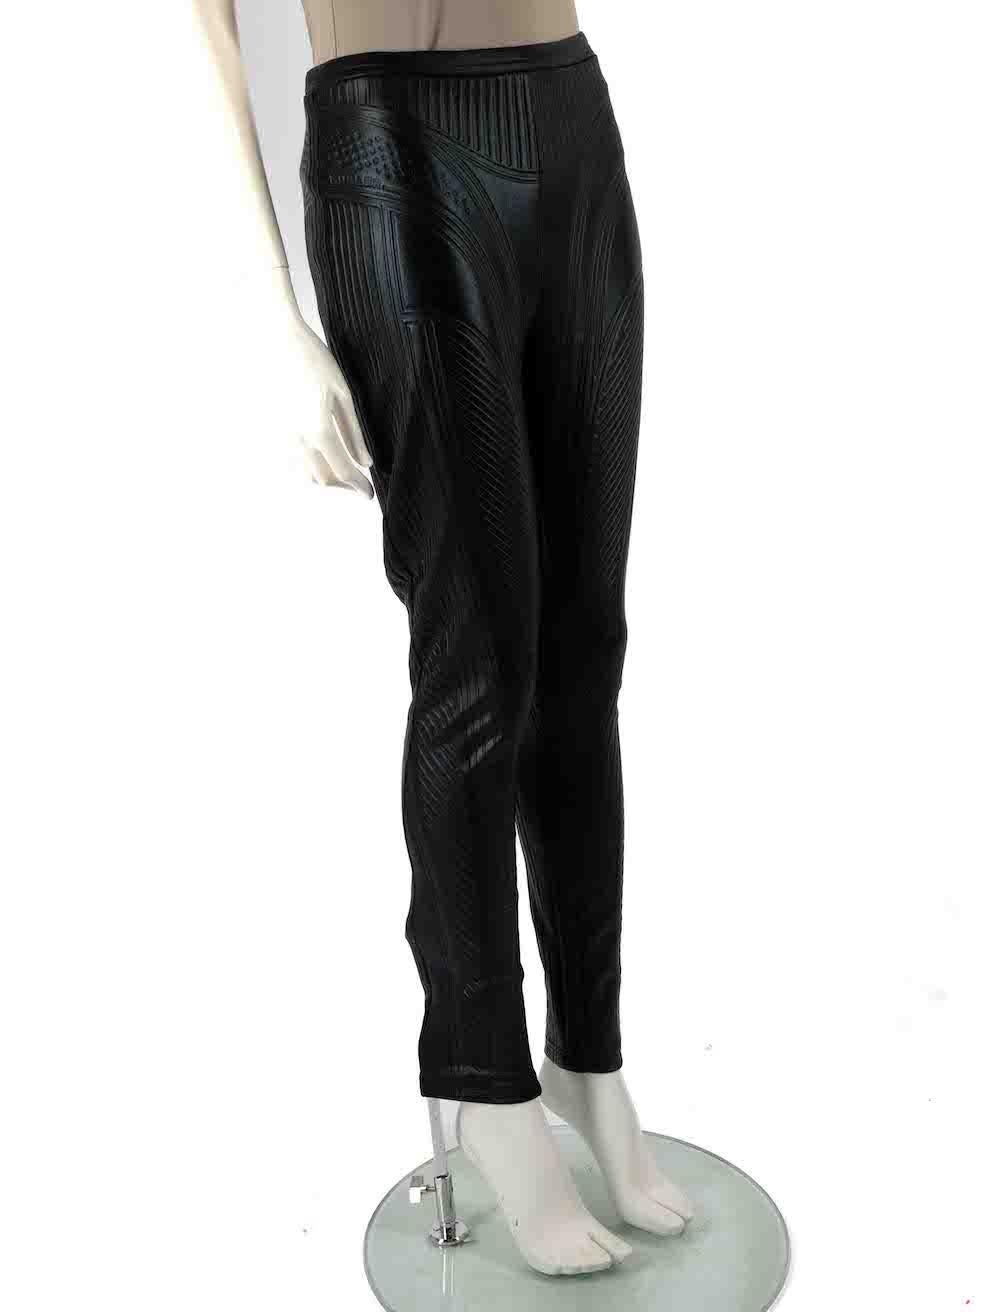 CONDITION is Very good. Hardly any visible wear to trousers. However, the brand label is missing on this used Mugler designer resale item.
 
 
 
 Details
 
 
 Black
 
 Polyester
 
 Leggings
 
 Embossed pattern
 
 High rise
 
 Iridescent effect
 
